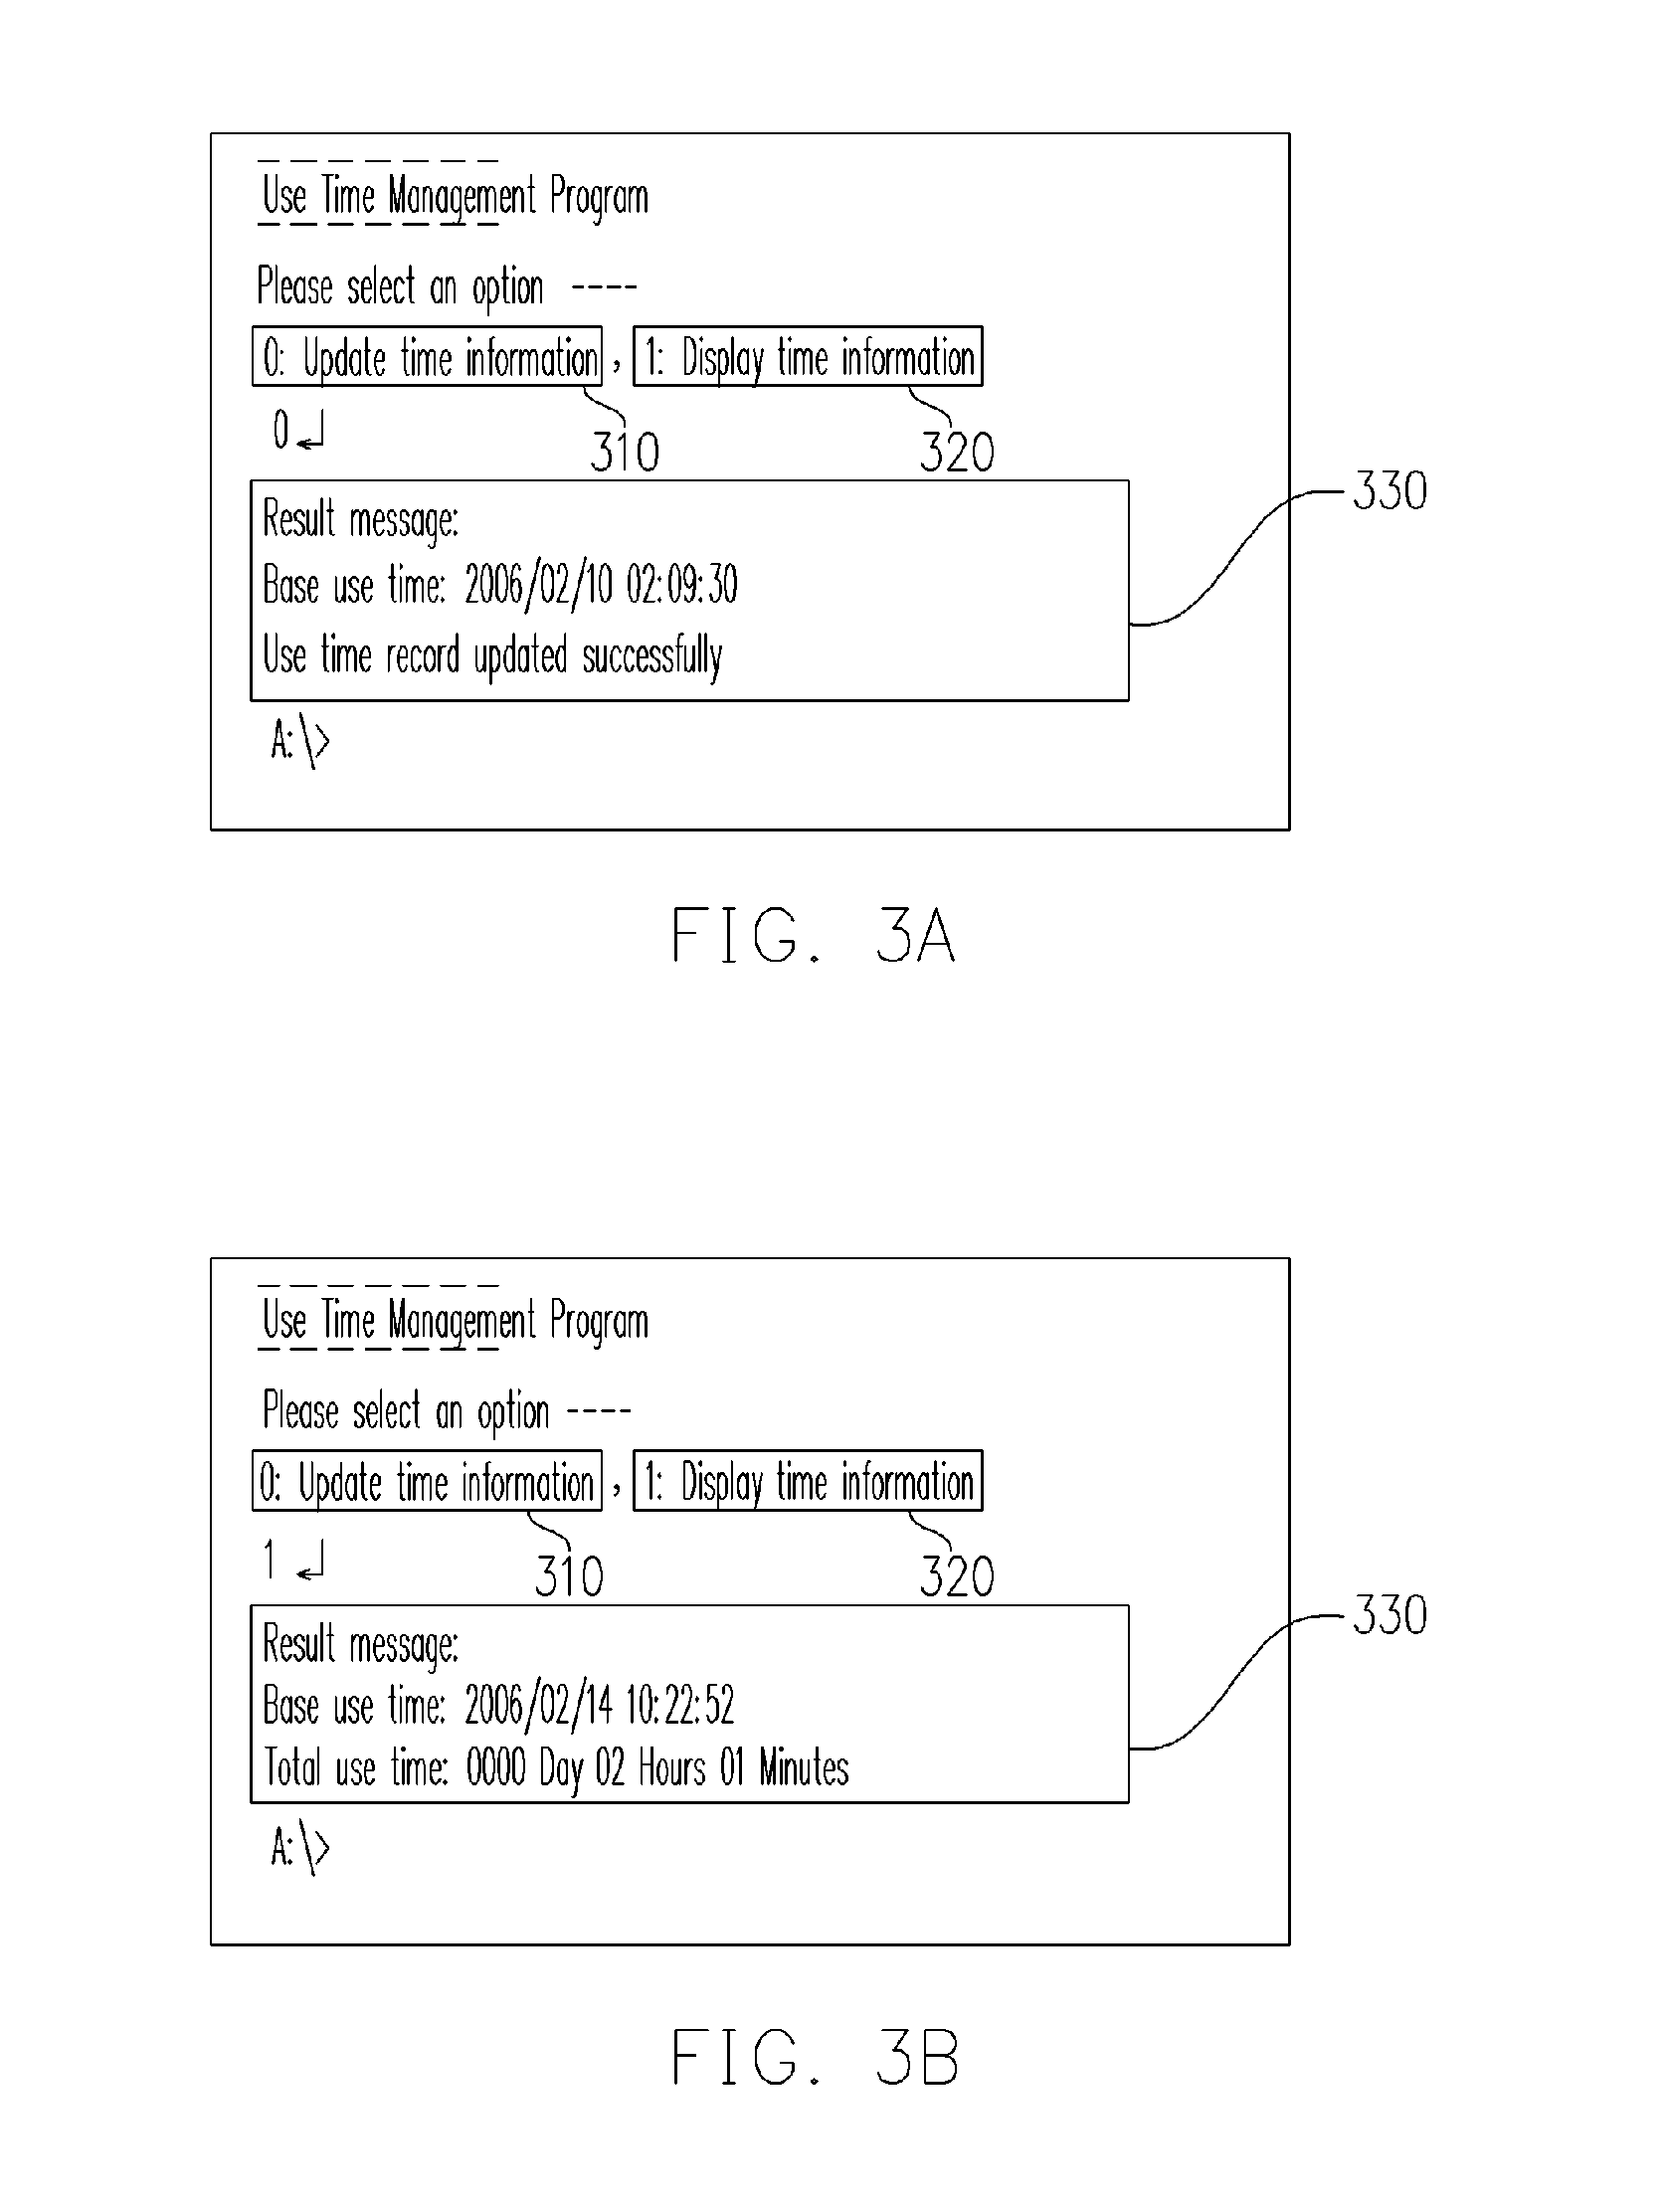 Method for recording use time of computer system